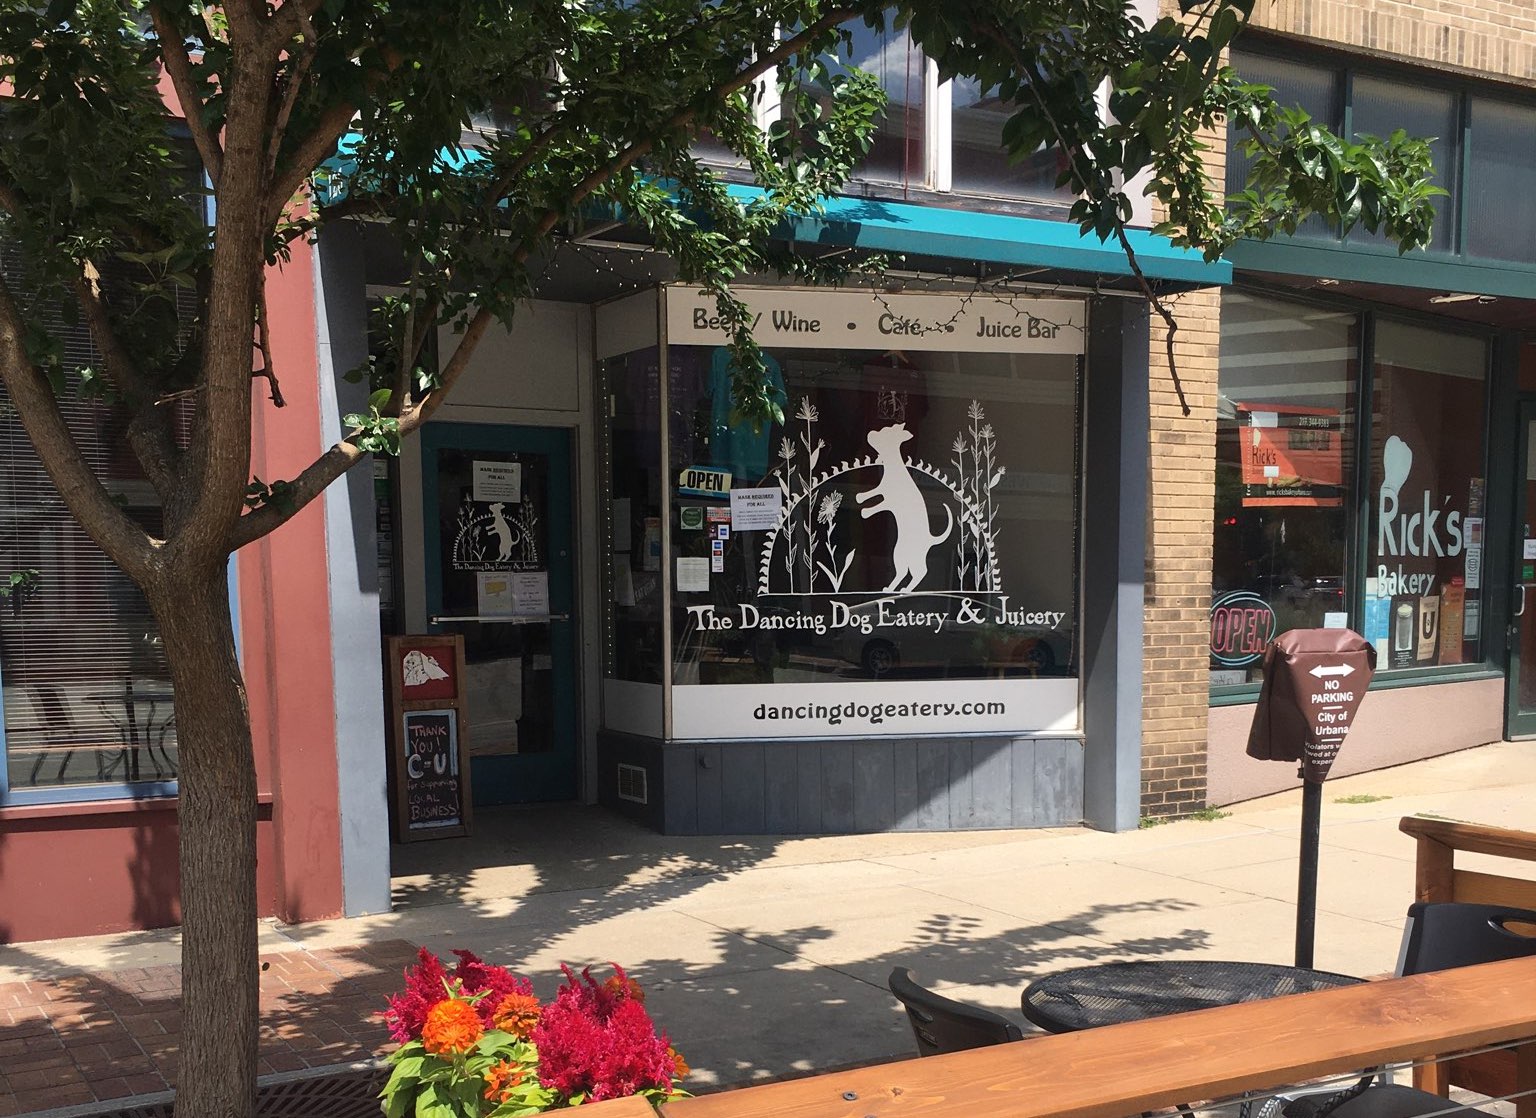 Dancing Dog is closing permanently by July 8th